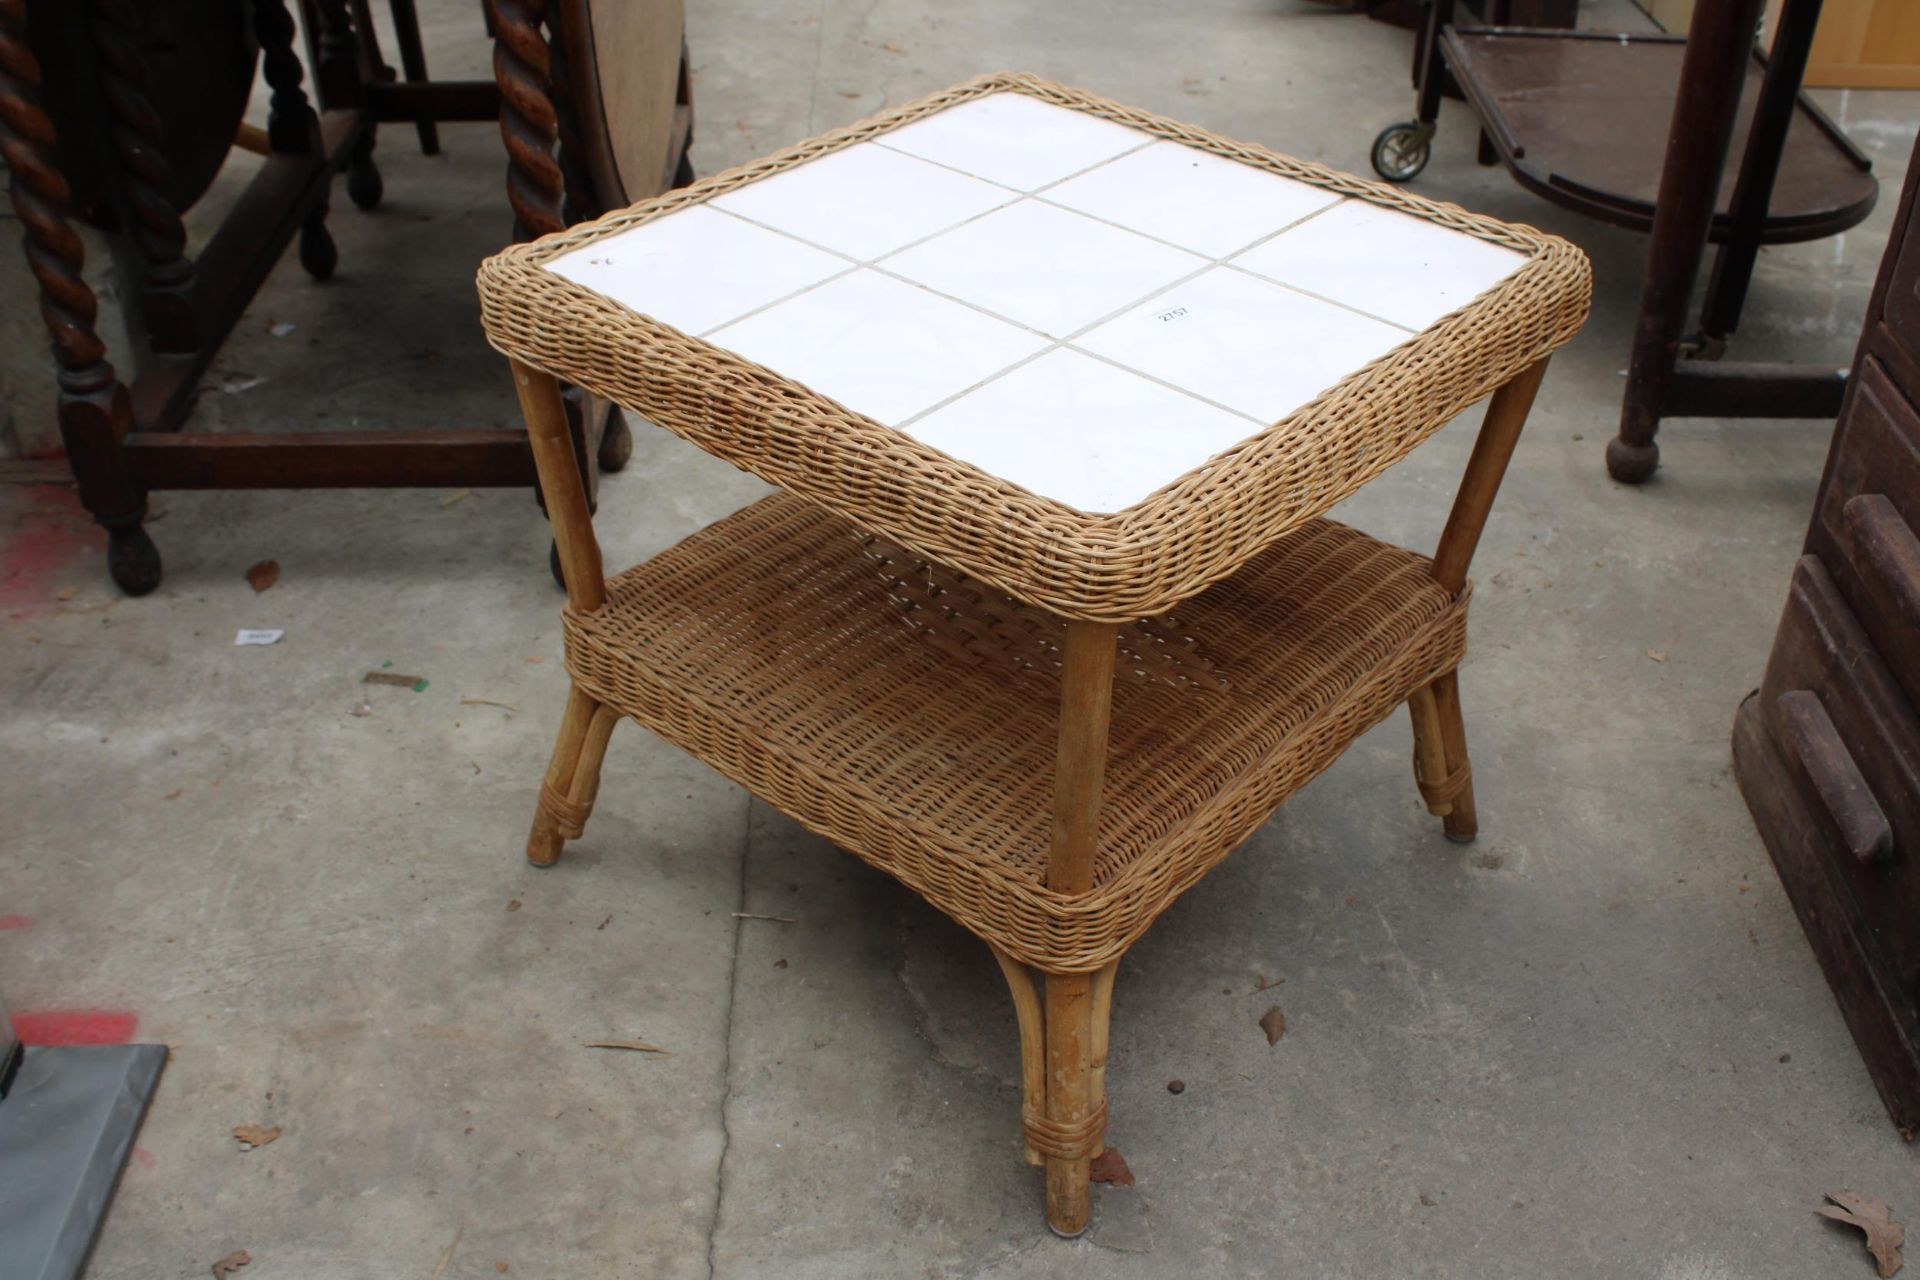 A TWO TIER WICKER LAMP TABLE WITH TILED TOP AND A GLASS FRONTED TWO DOOR BOOKCASE - Image 4 of 6